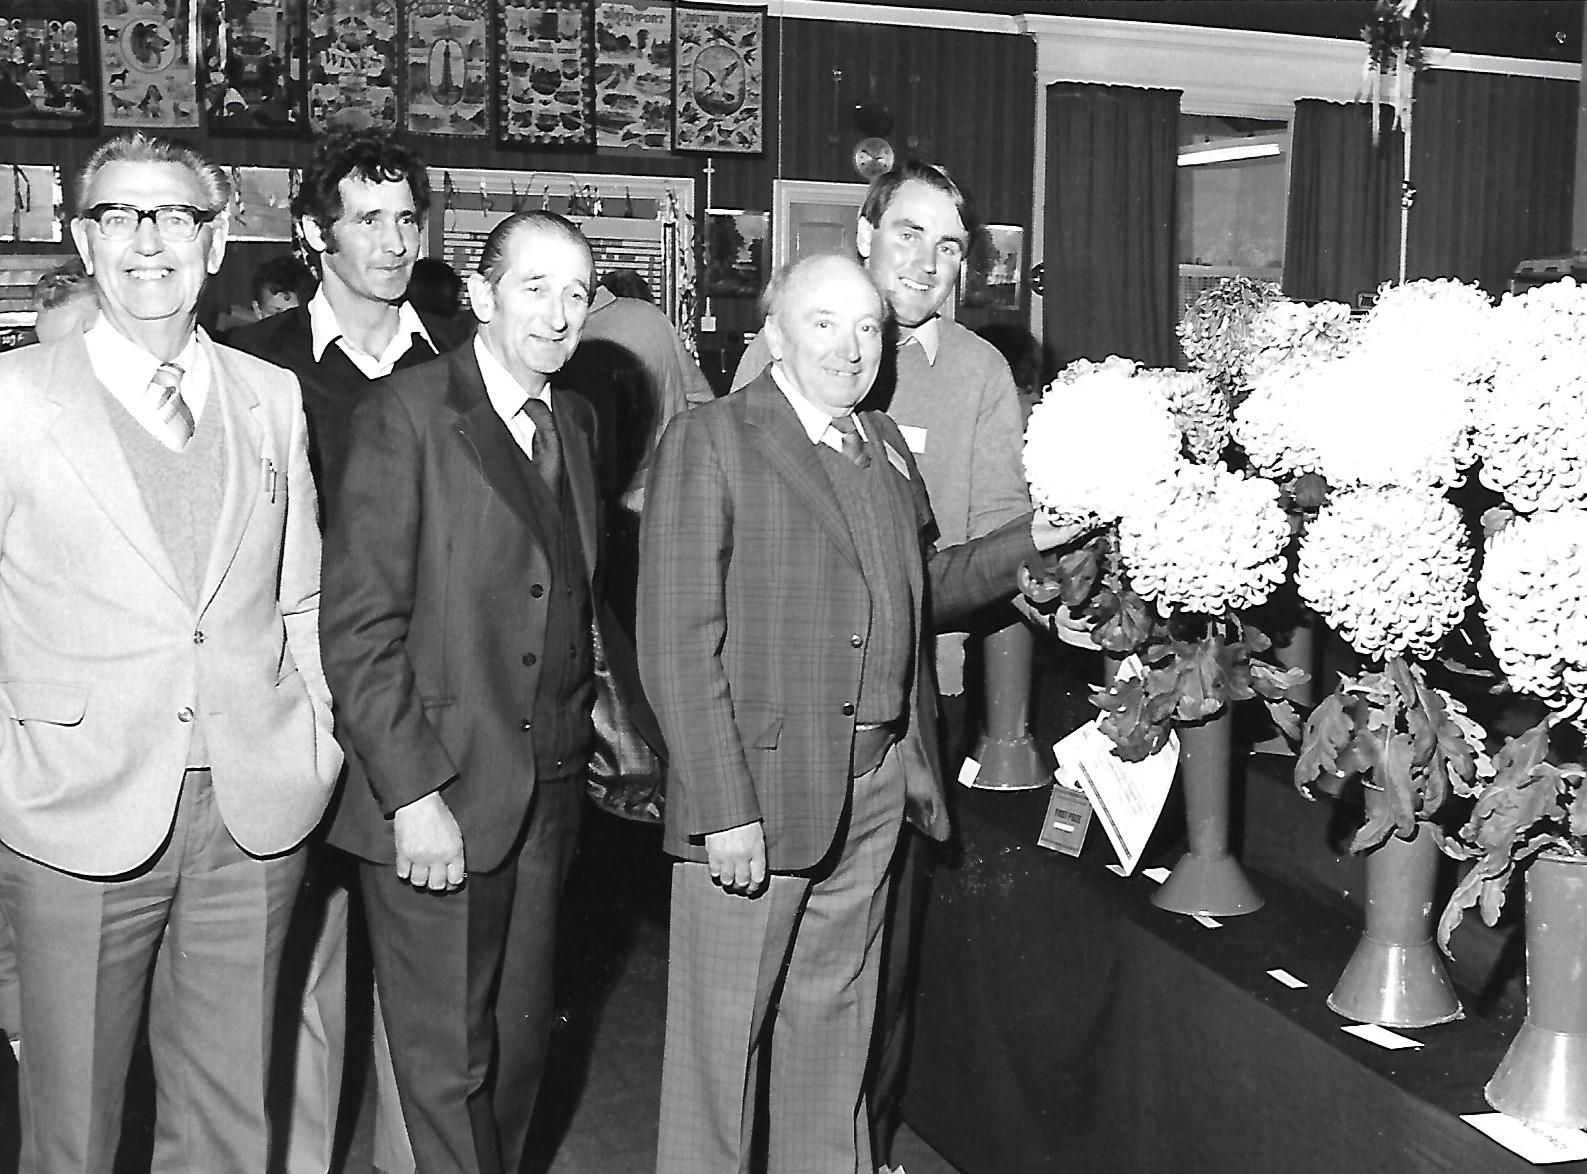 Southport Chrysanthemum Society show in Southport on October 1984